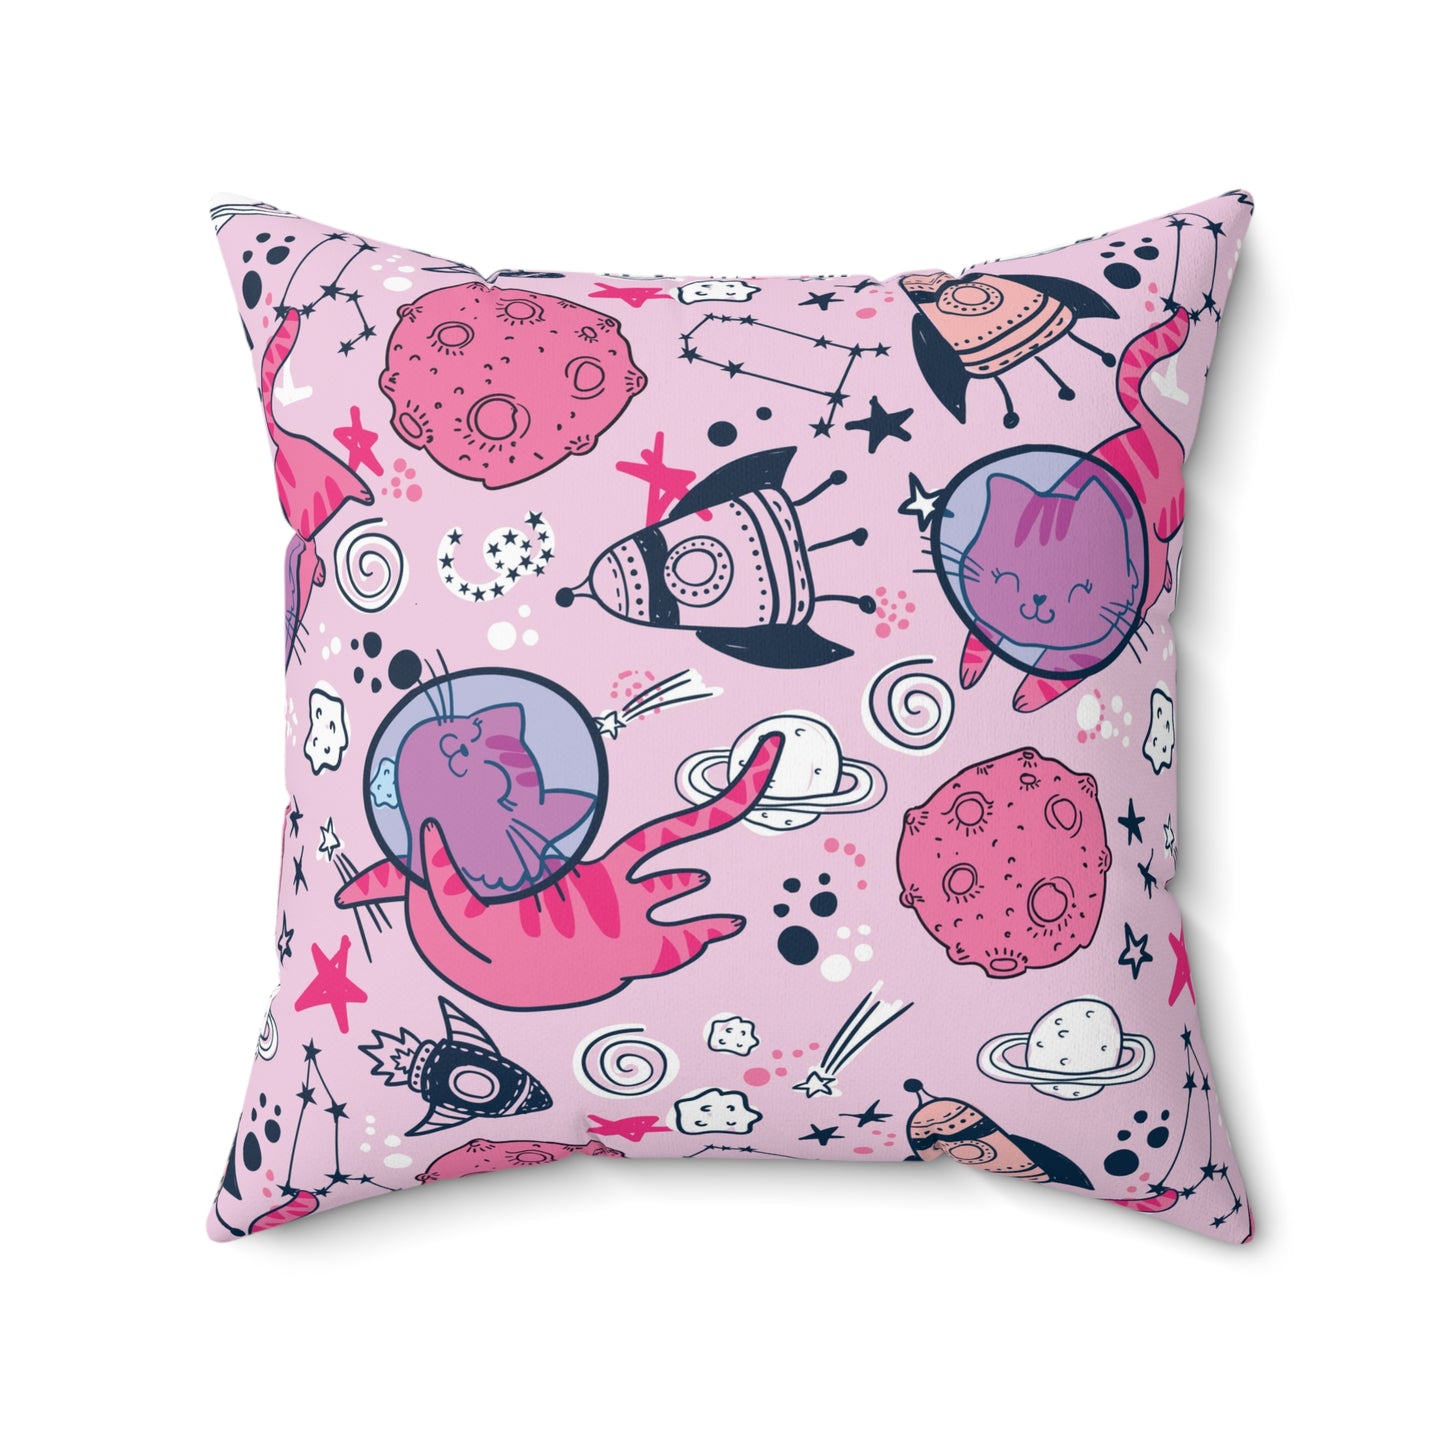 Space Cats Spun Polyester Square Pillow